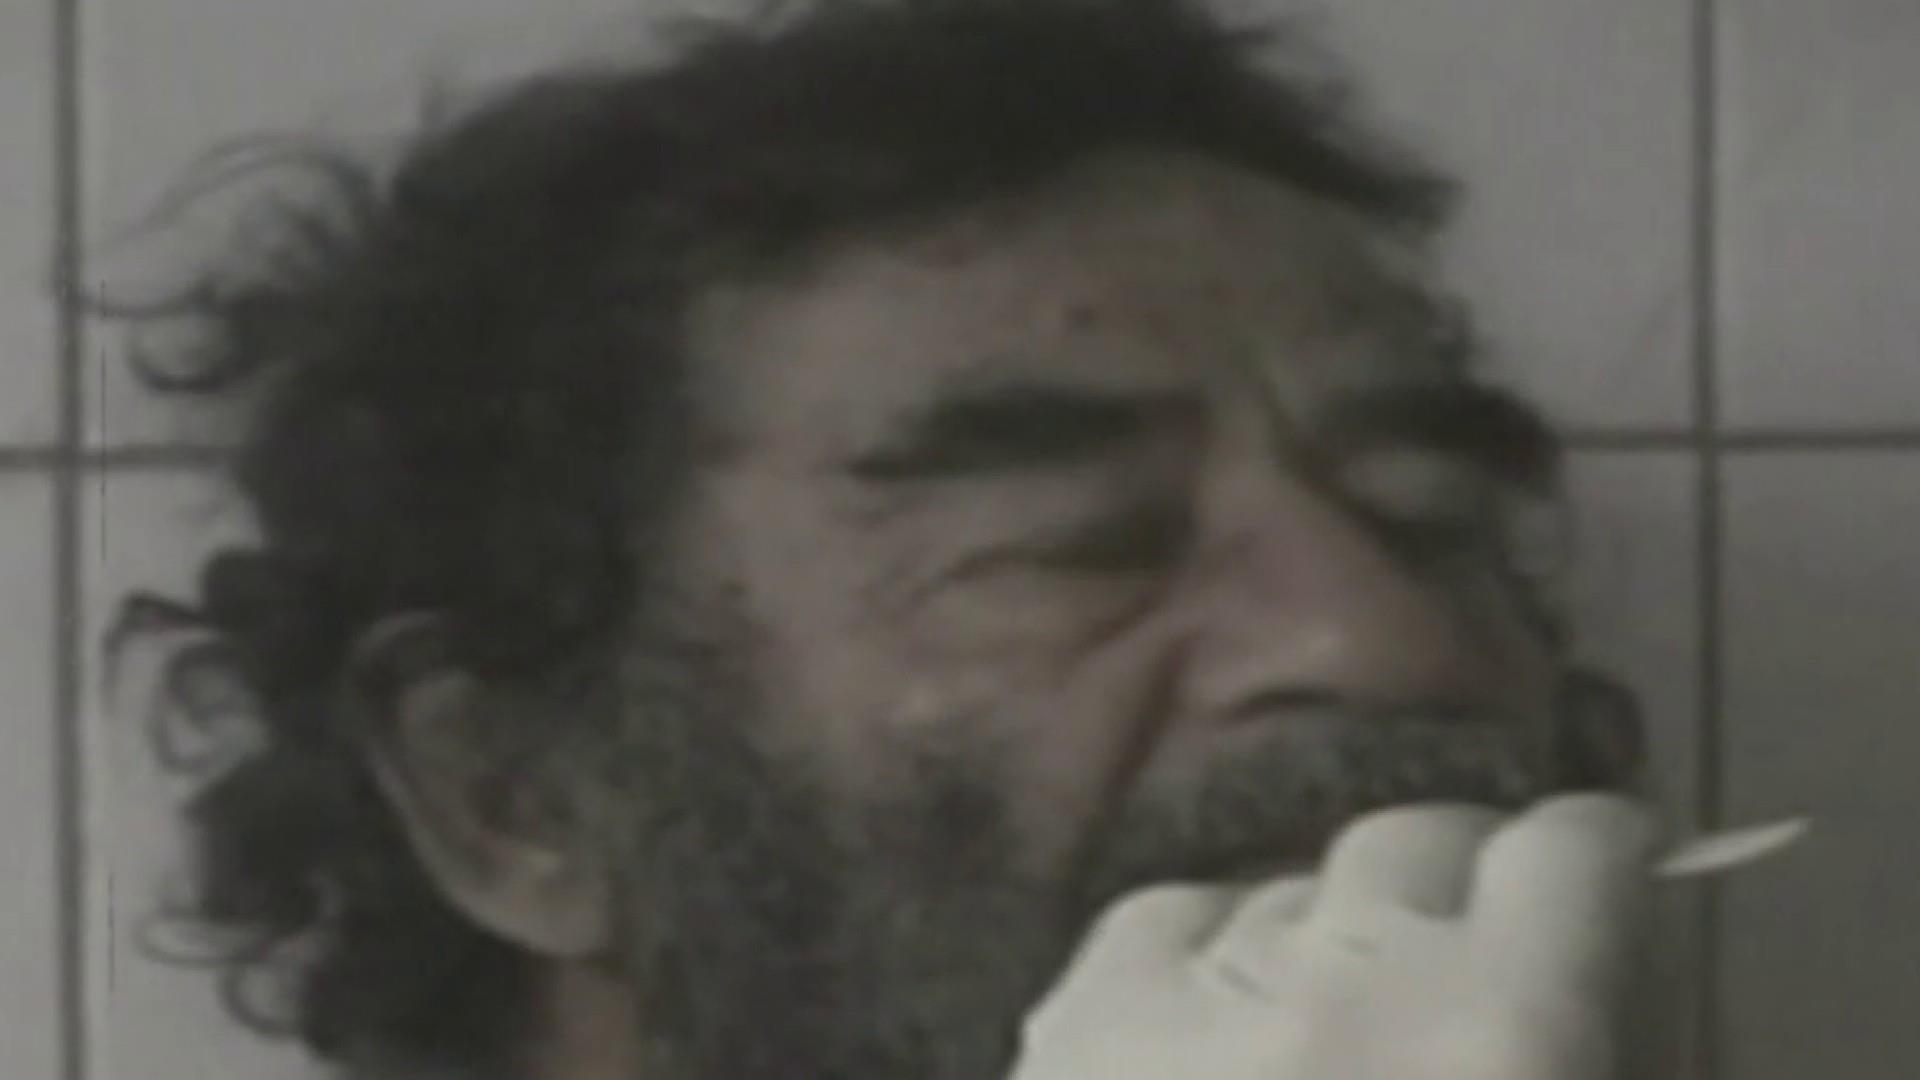 From the archives: Saddam Hussein captured by . forces